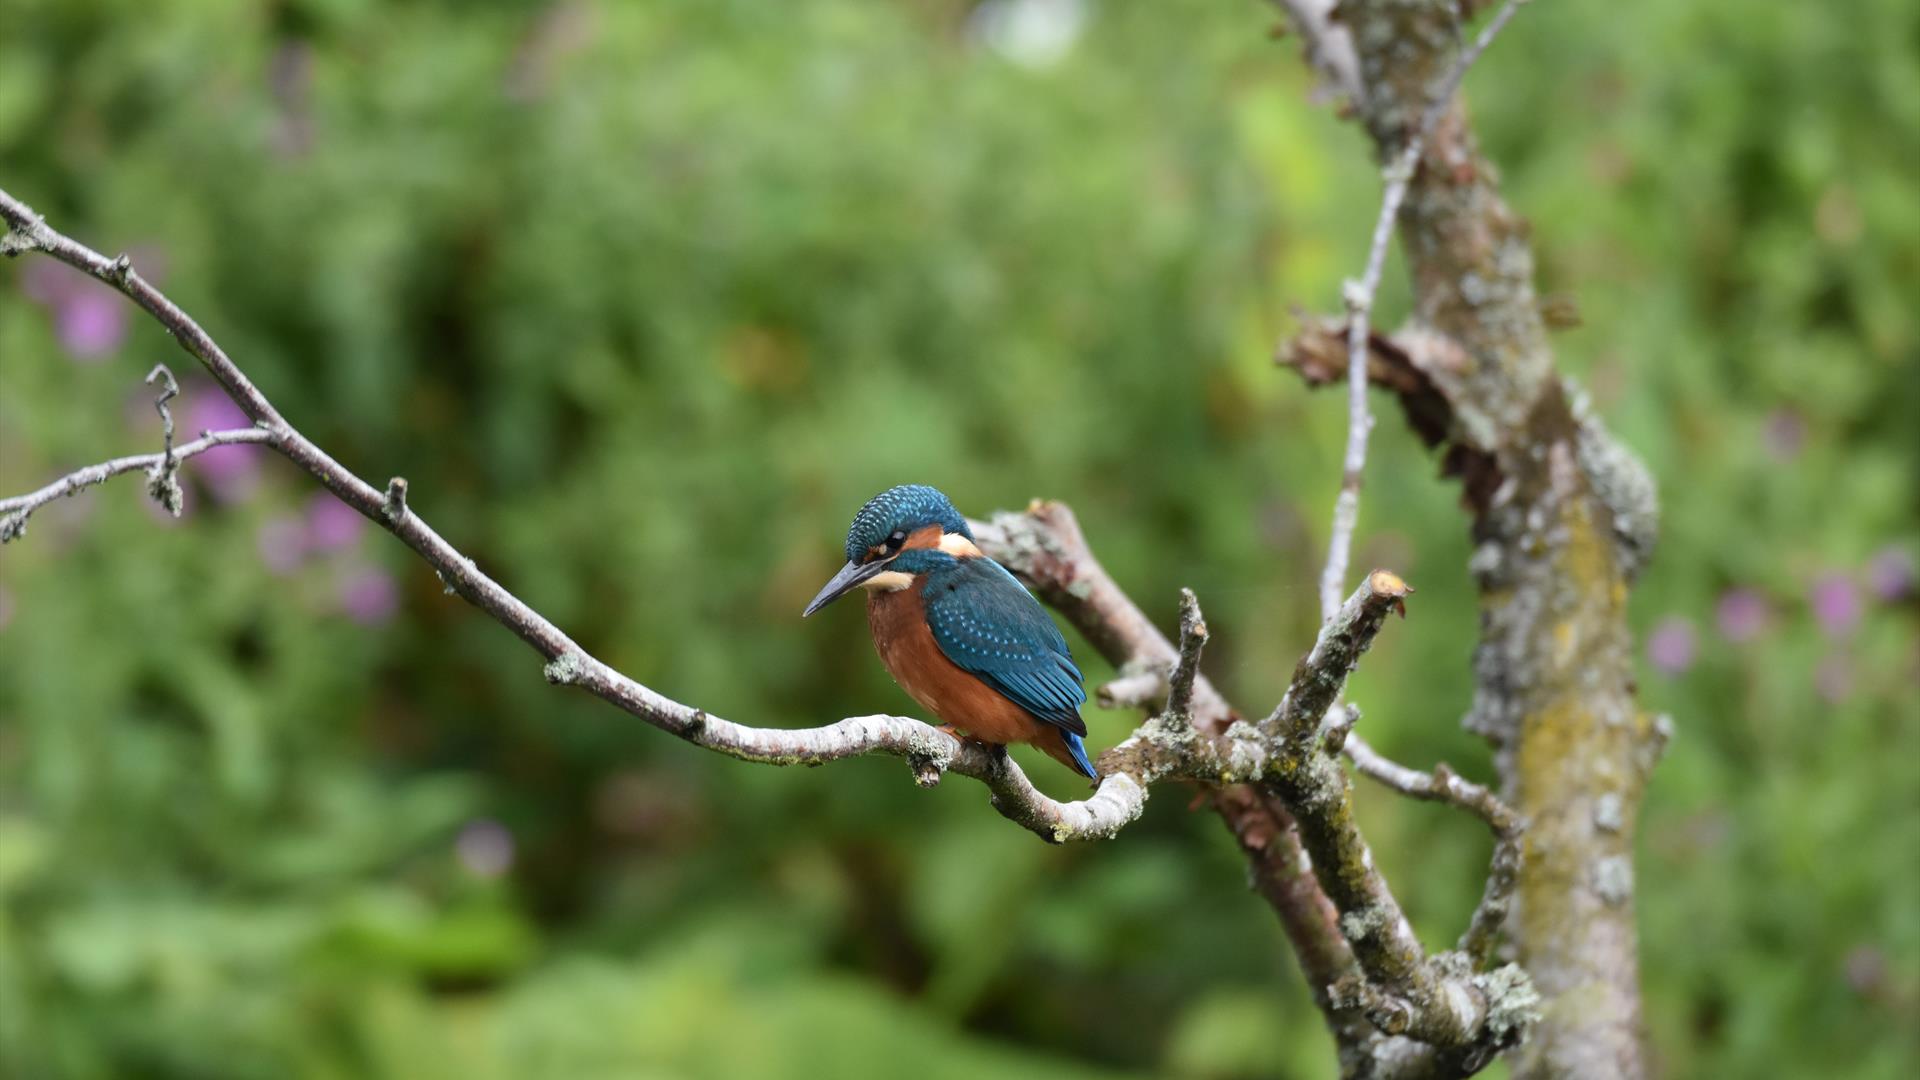 Kingfisher on branch of tree